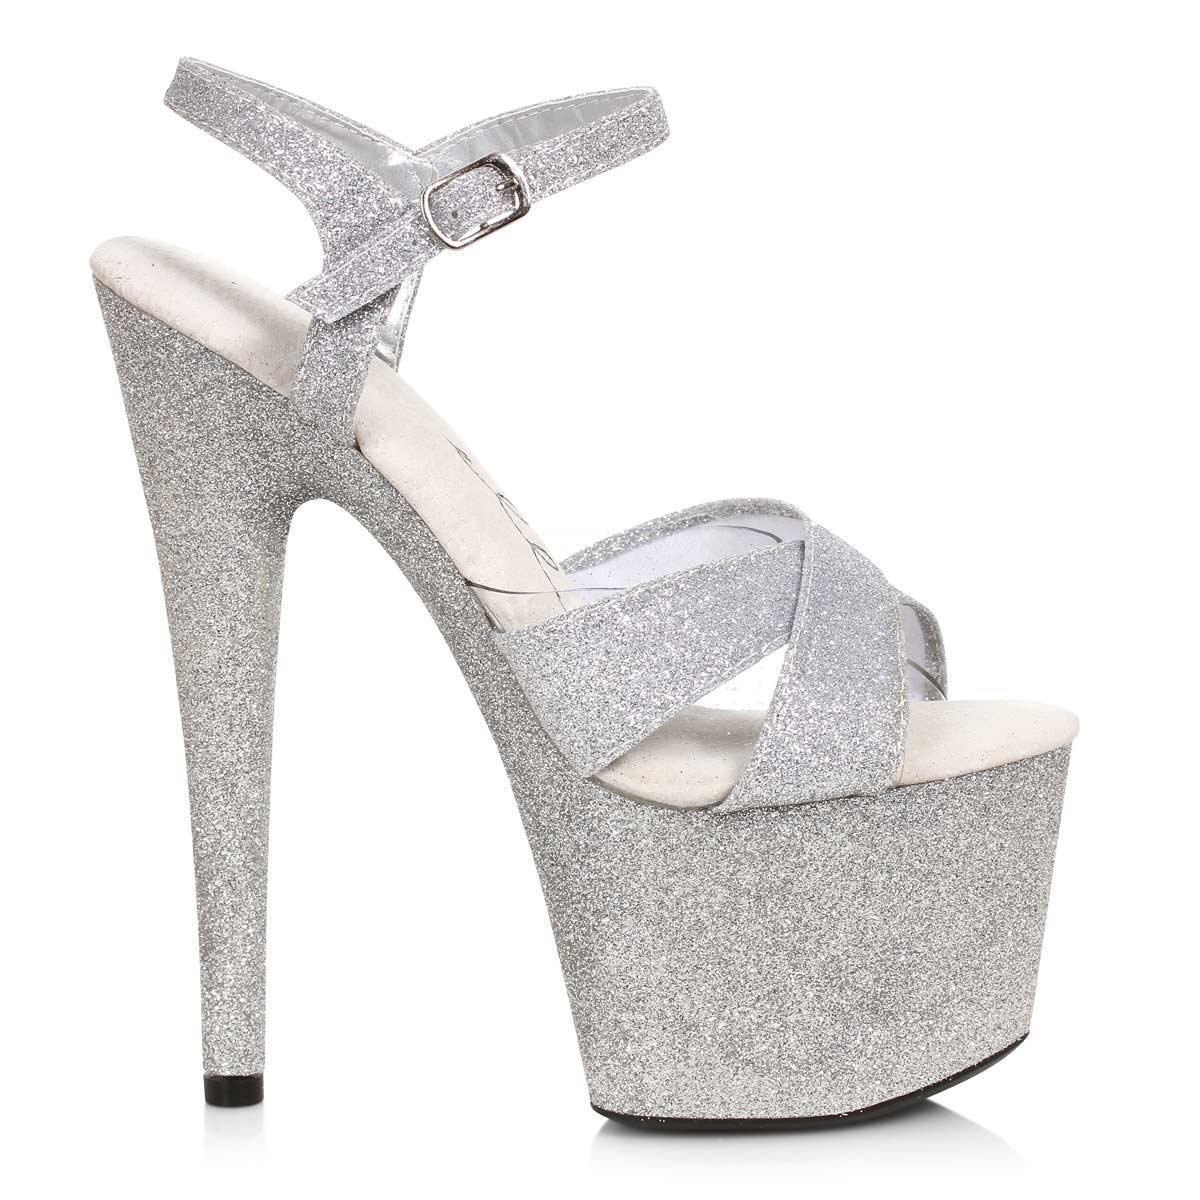 Ellie Shoes 709-VICKY Silver in Sexy Heels & Platforms - $70.39